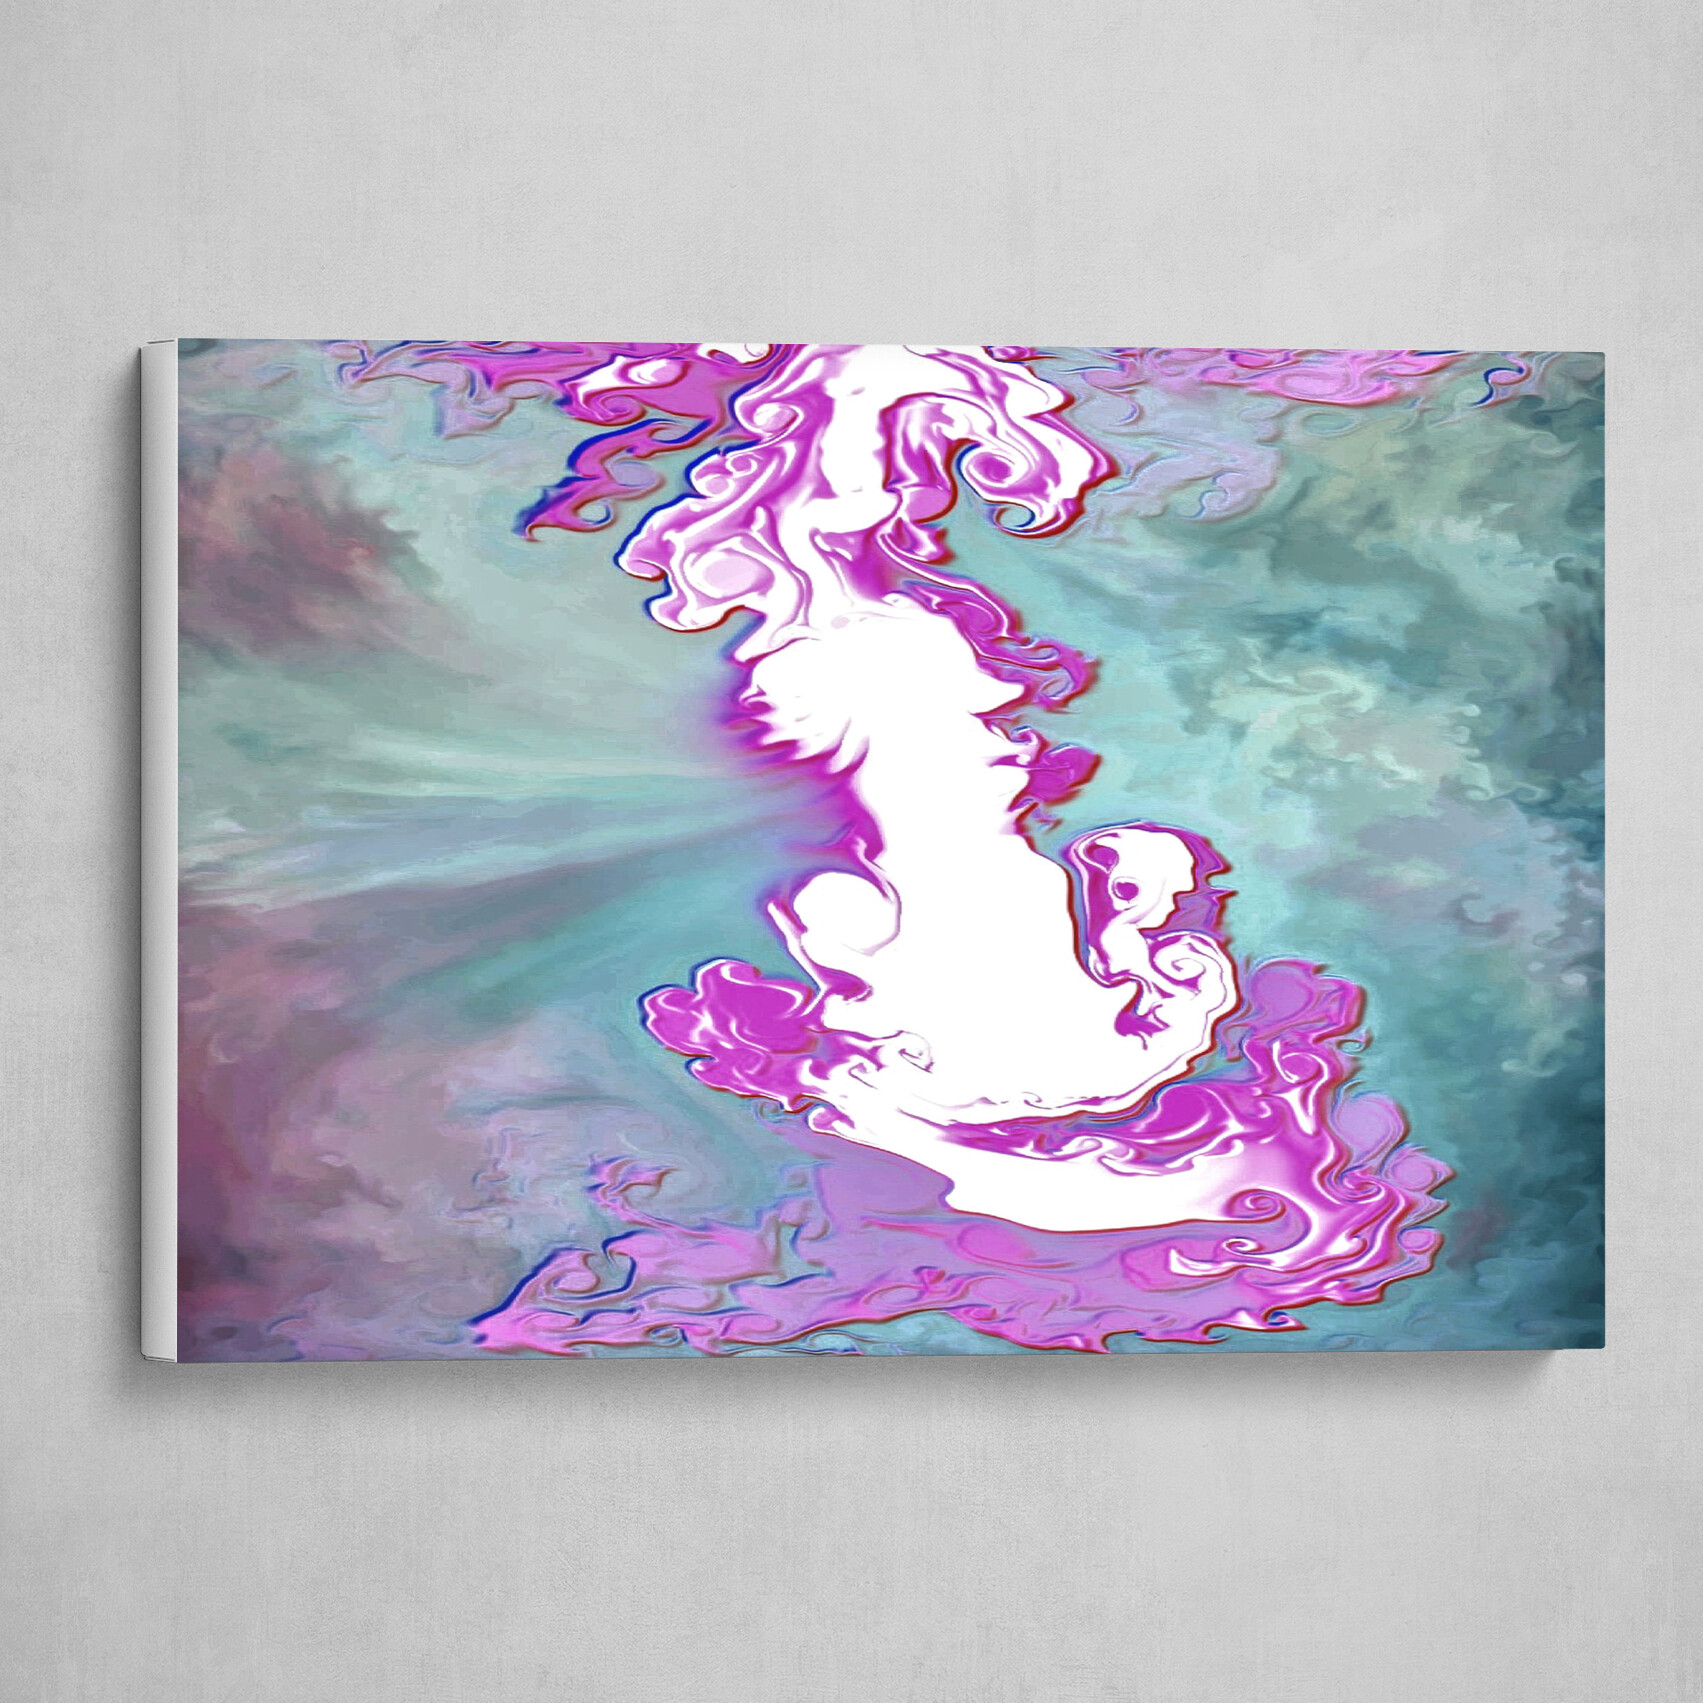 Purple White and Blue fluid pour abstract art 4